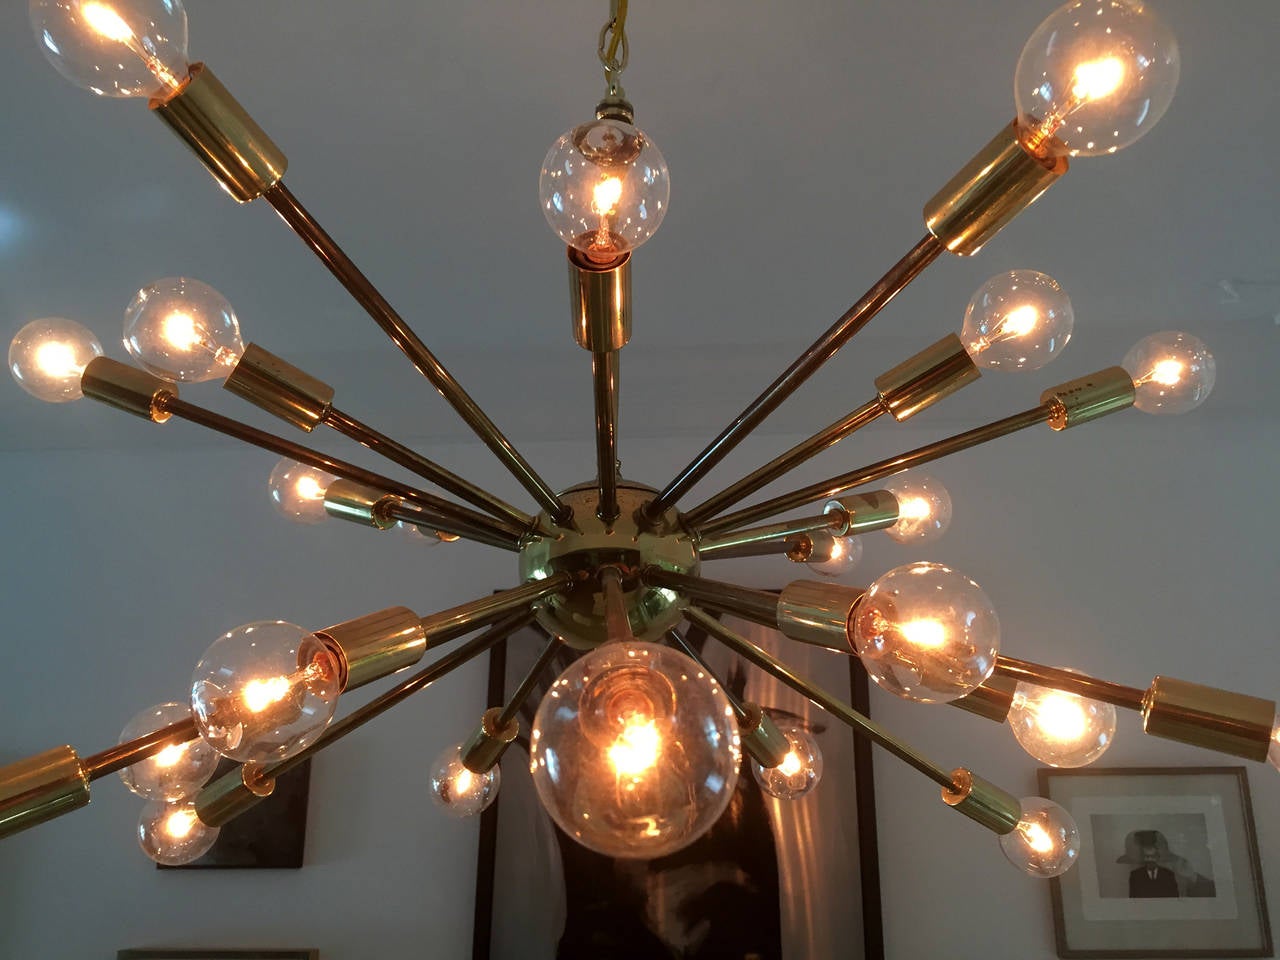 Featuring 24 arms on two tier, this brass sputnik chandelier shows off a lot of vintage charm. American origin likely made by Lightolier circa 1950s', the chandelier displays wonderful patina that comes with age as shown in the last photos. The